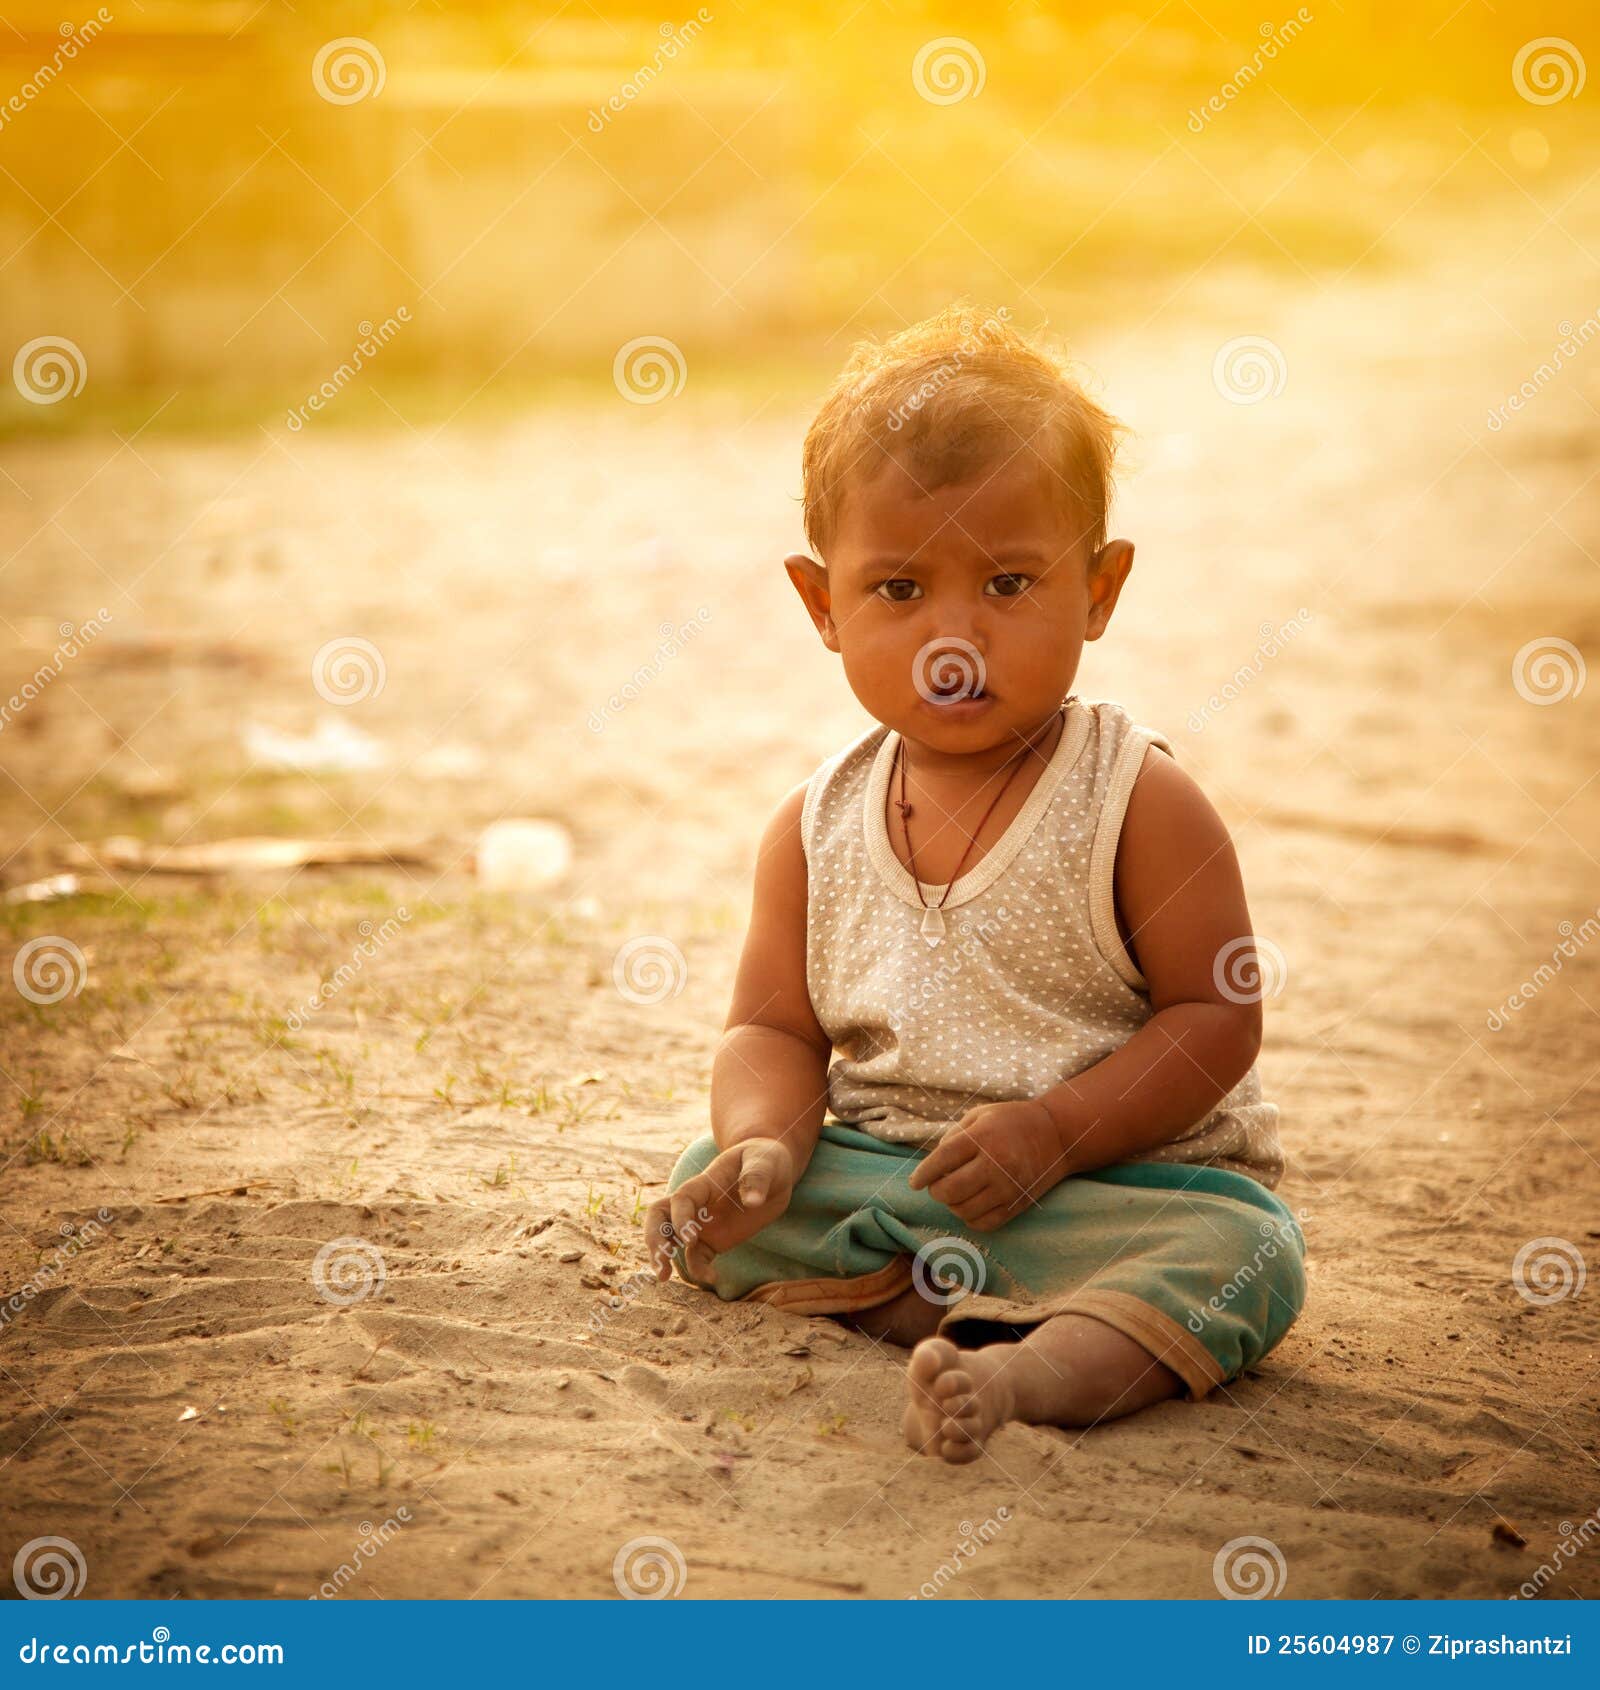 Innocent Indian Child Editorial Photography - Image: 25604987